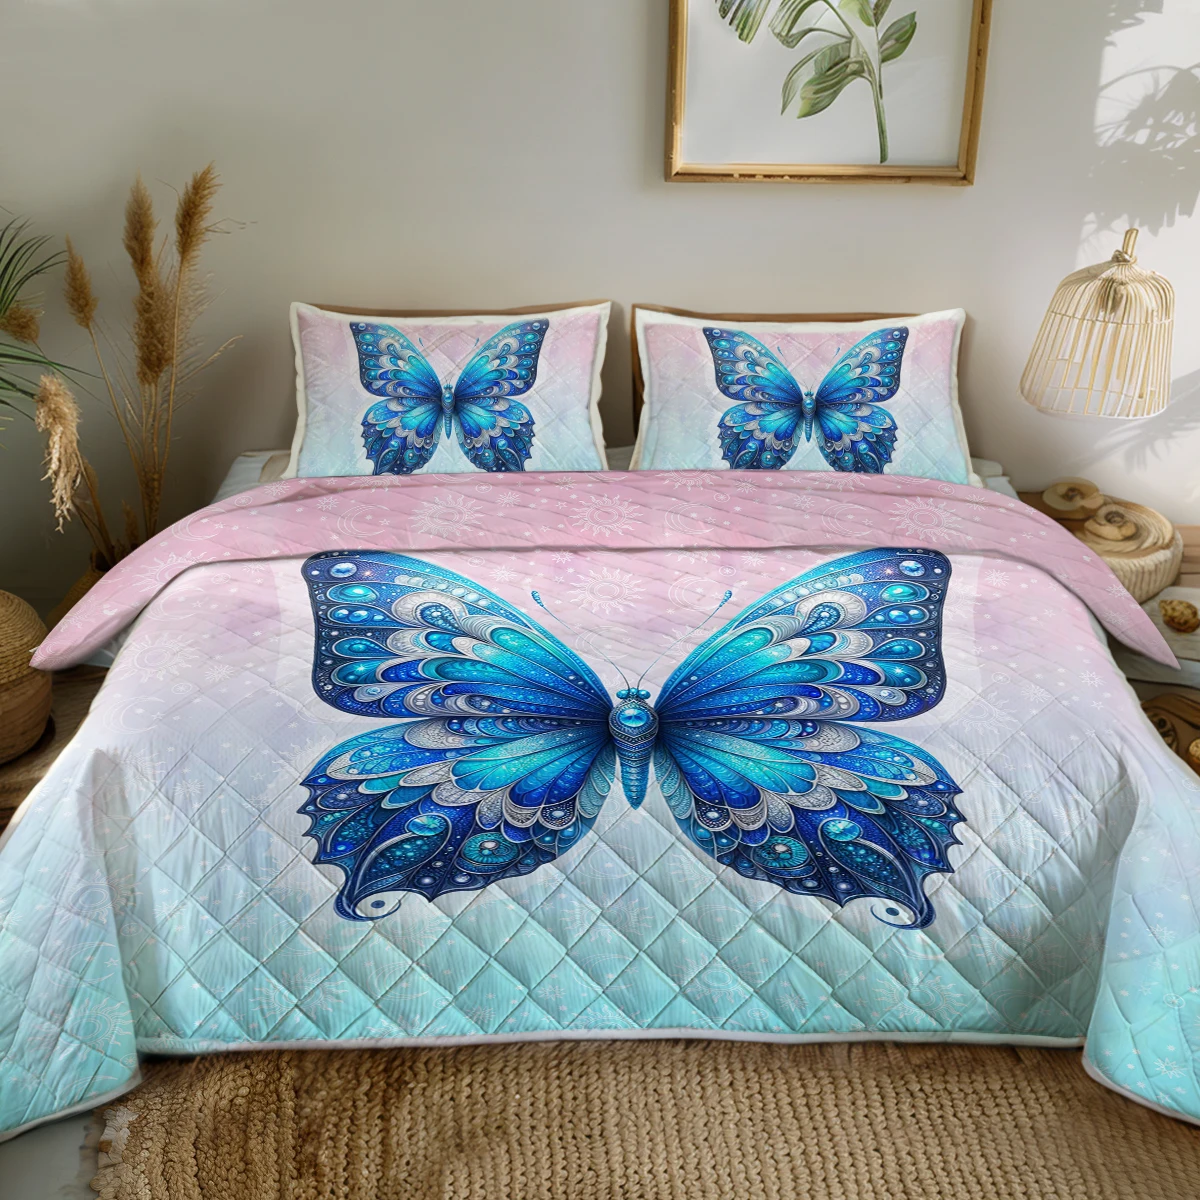 

Blue Butterfly Setting with Jewellery Printed Quilt Set Home Decor Comforter With 2 Pilowcases For Kids and Adults Bedroom